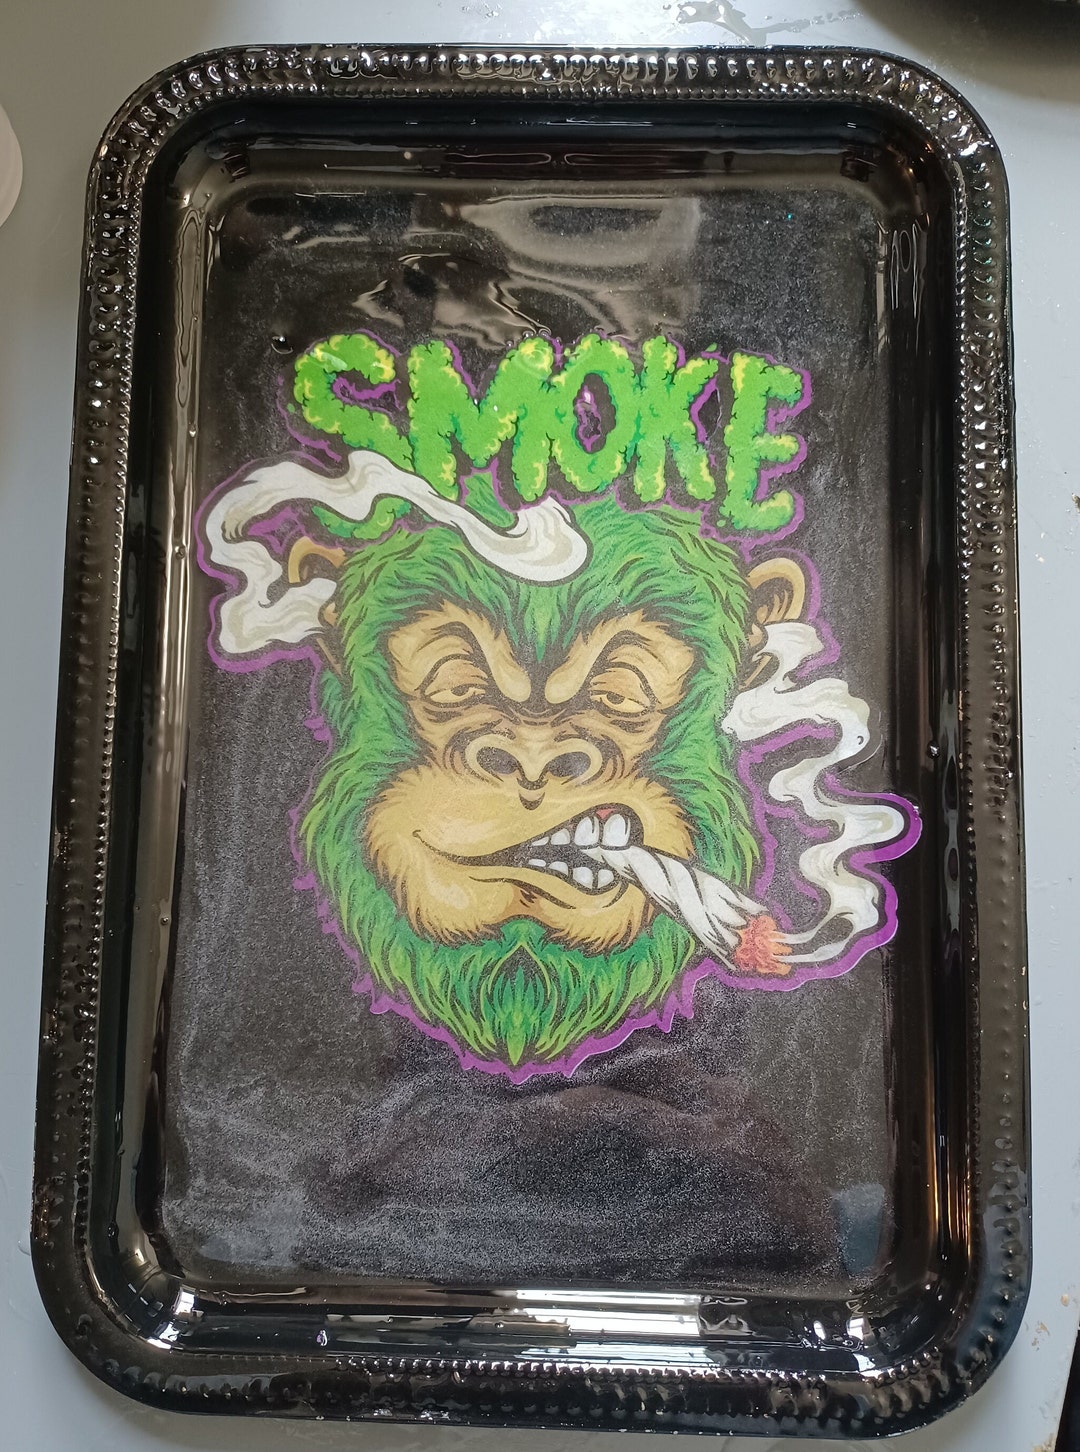 RICK AND MORTY ROLLING TRAY MEDIUM BREAKING RICK – ALL IN ONE SMOKE SHOP